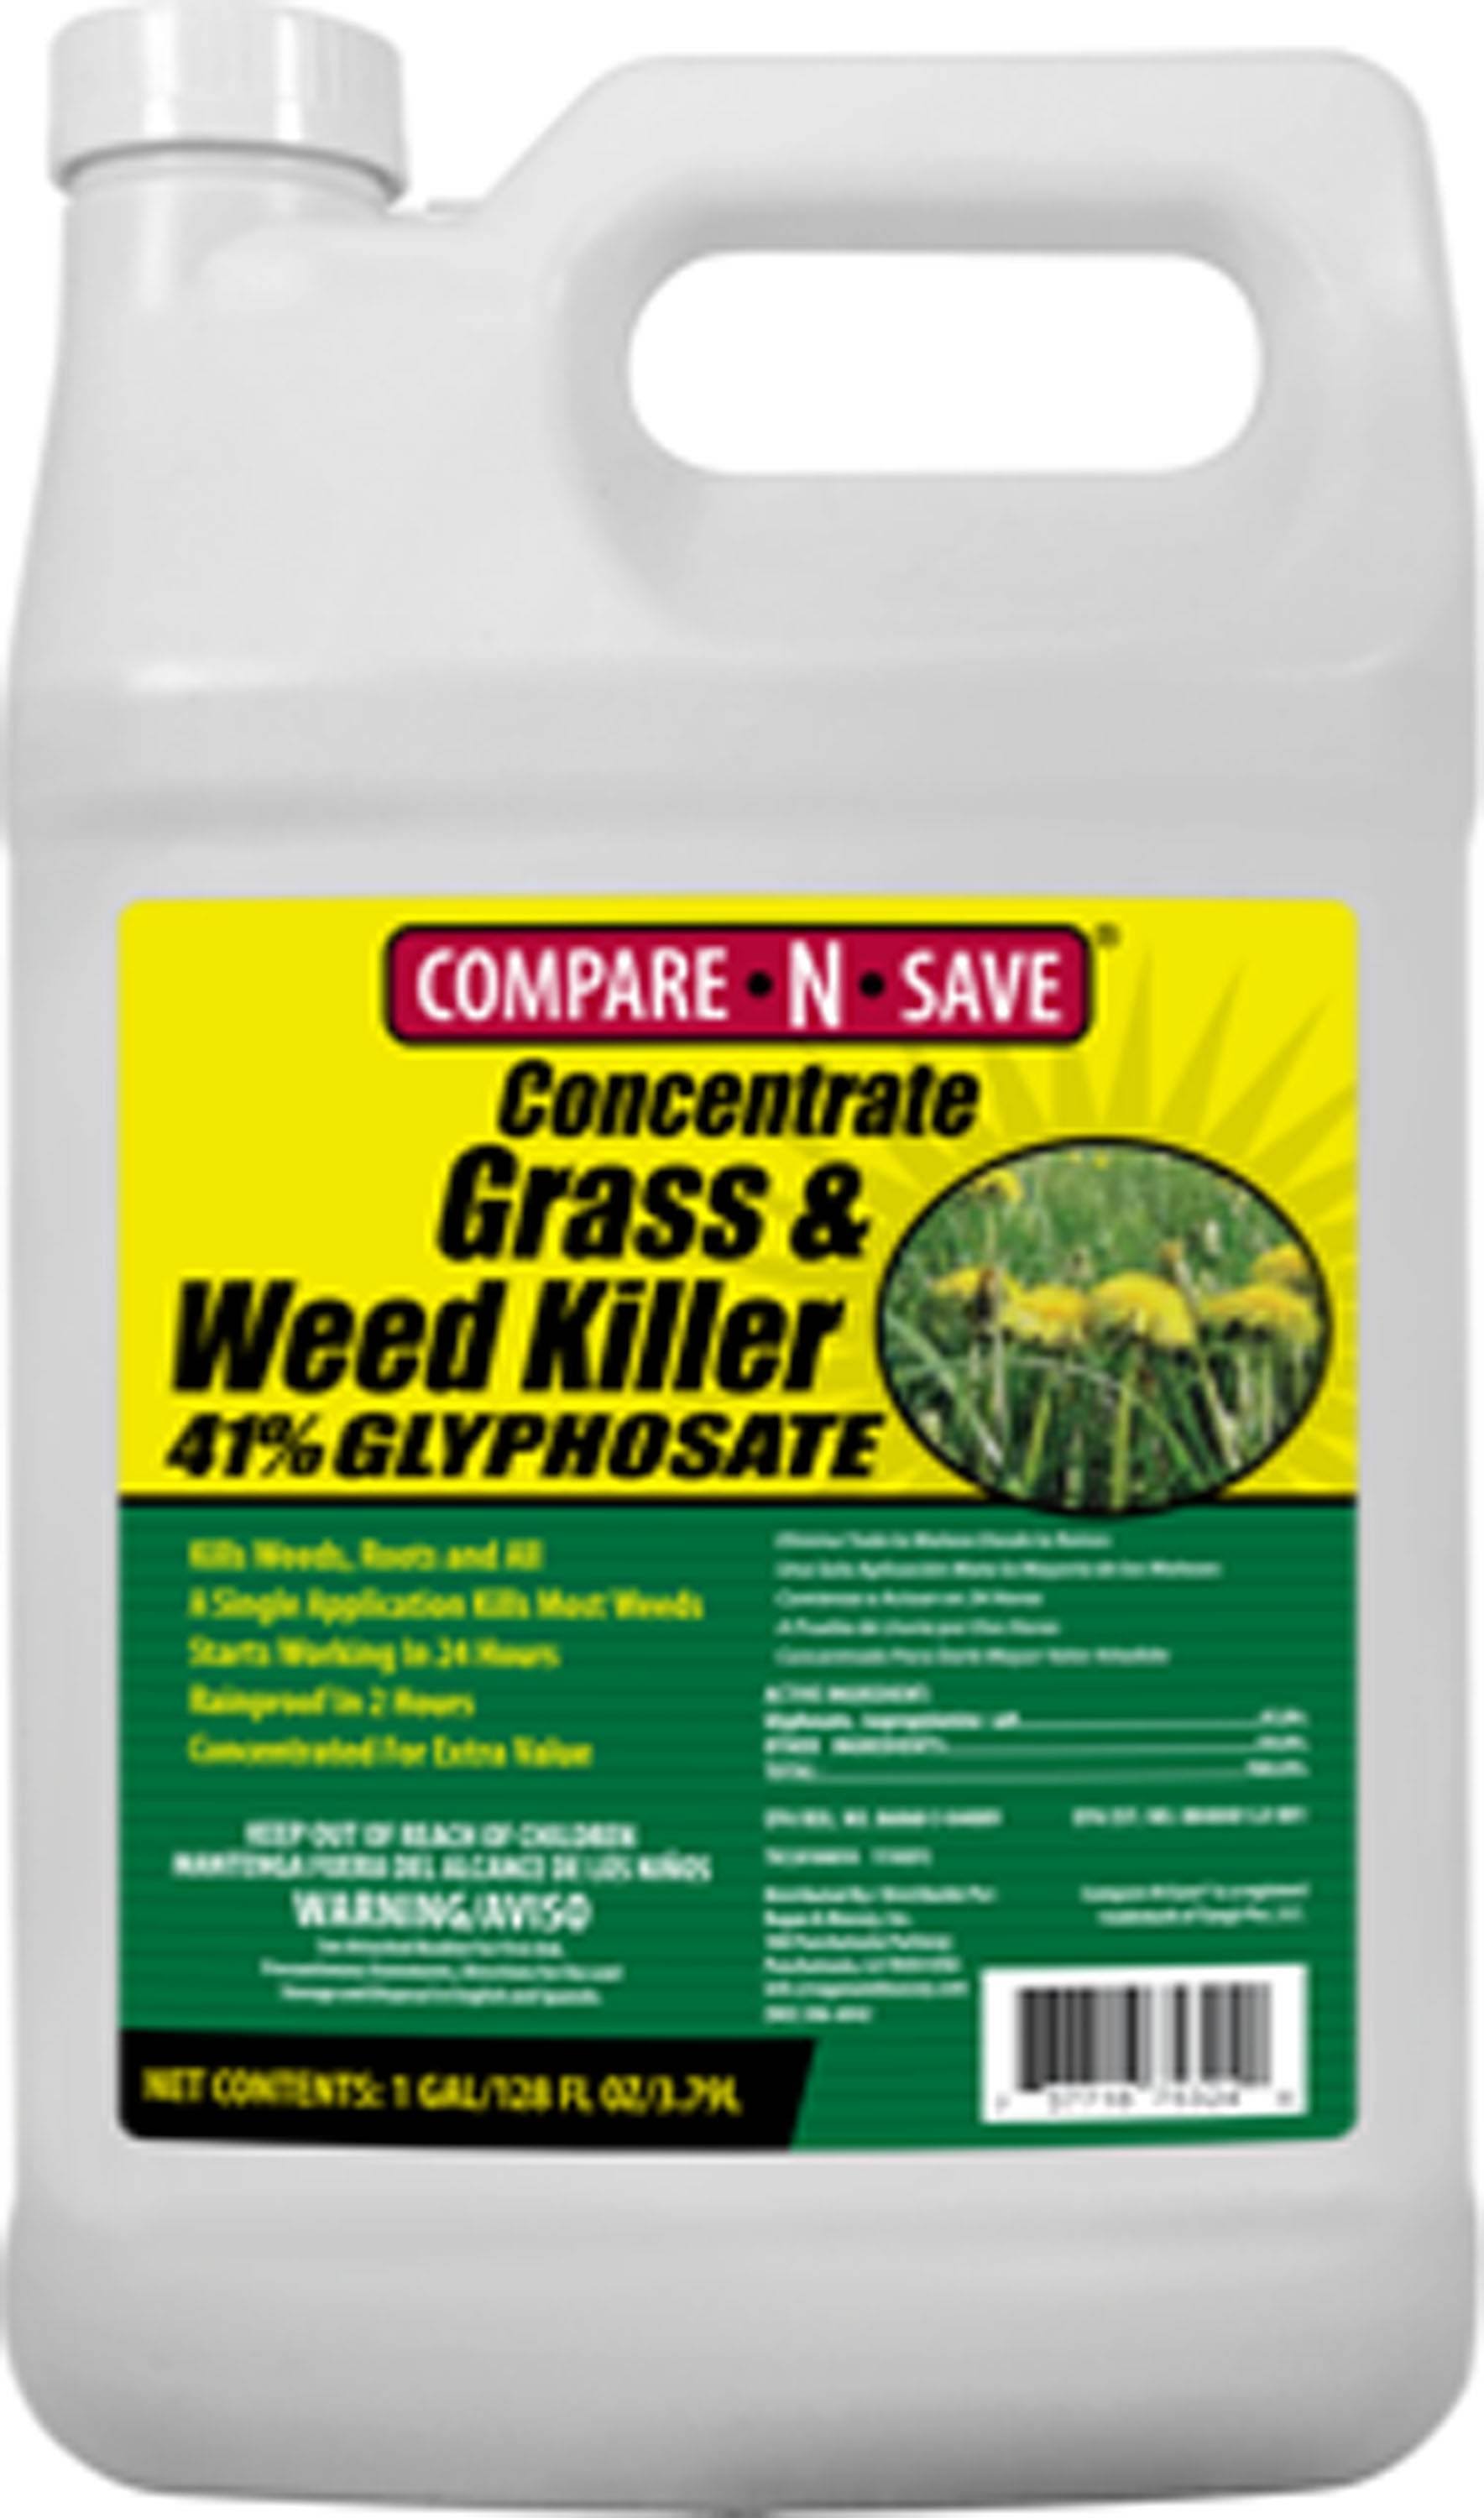 Compare-N-Save Grass & Weed Killer 41% Glyphosate Concentrate - 1gal